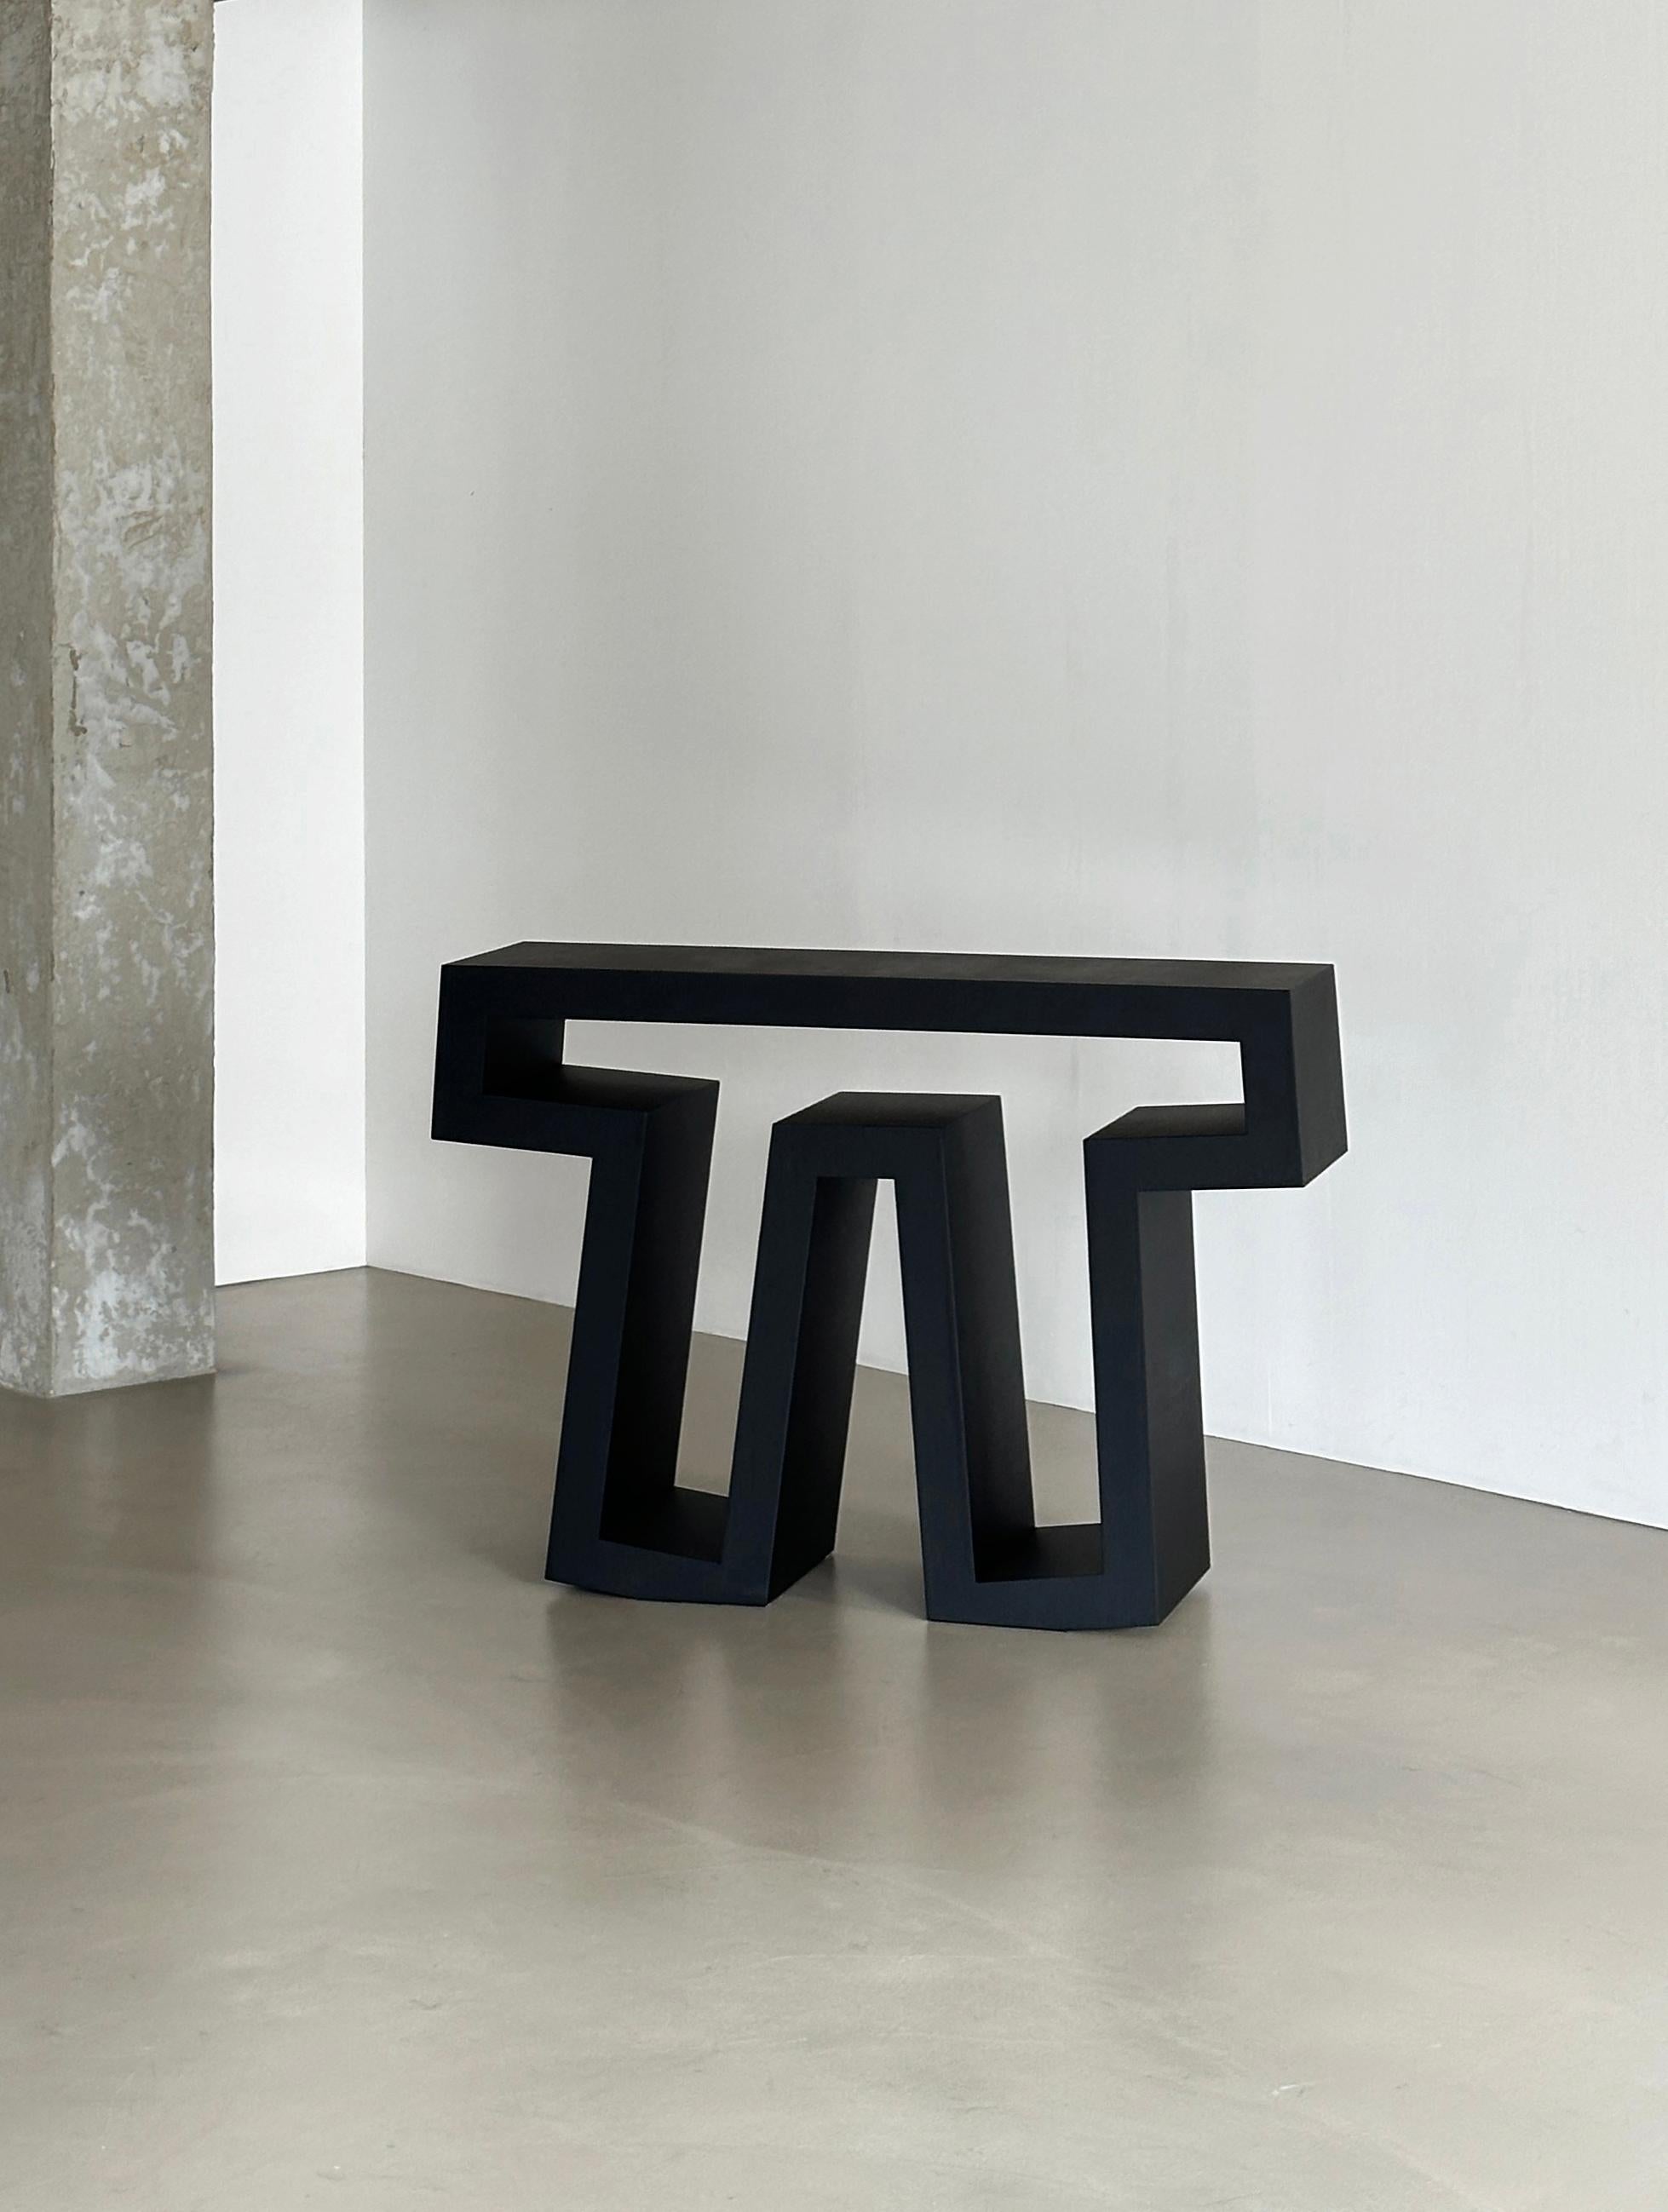 Graffiti Project Console Table by Wonwoo Koo
Dimensions: D 35 x W 120 x H 85 cm.
Materials: Oak wood veneer.

Different color options are available: black, beige, white gray, blue or orange. Please contact us.

Wonwoo Koo
I majored in furniture